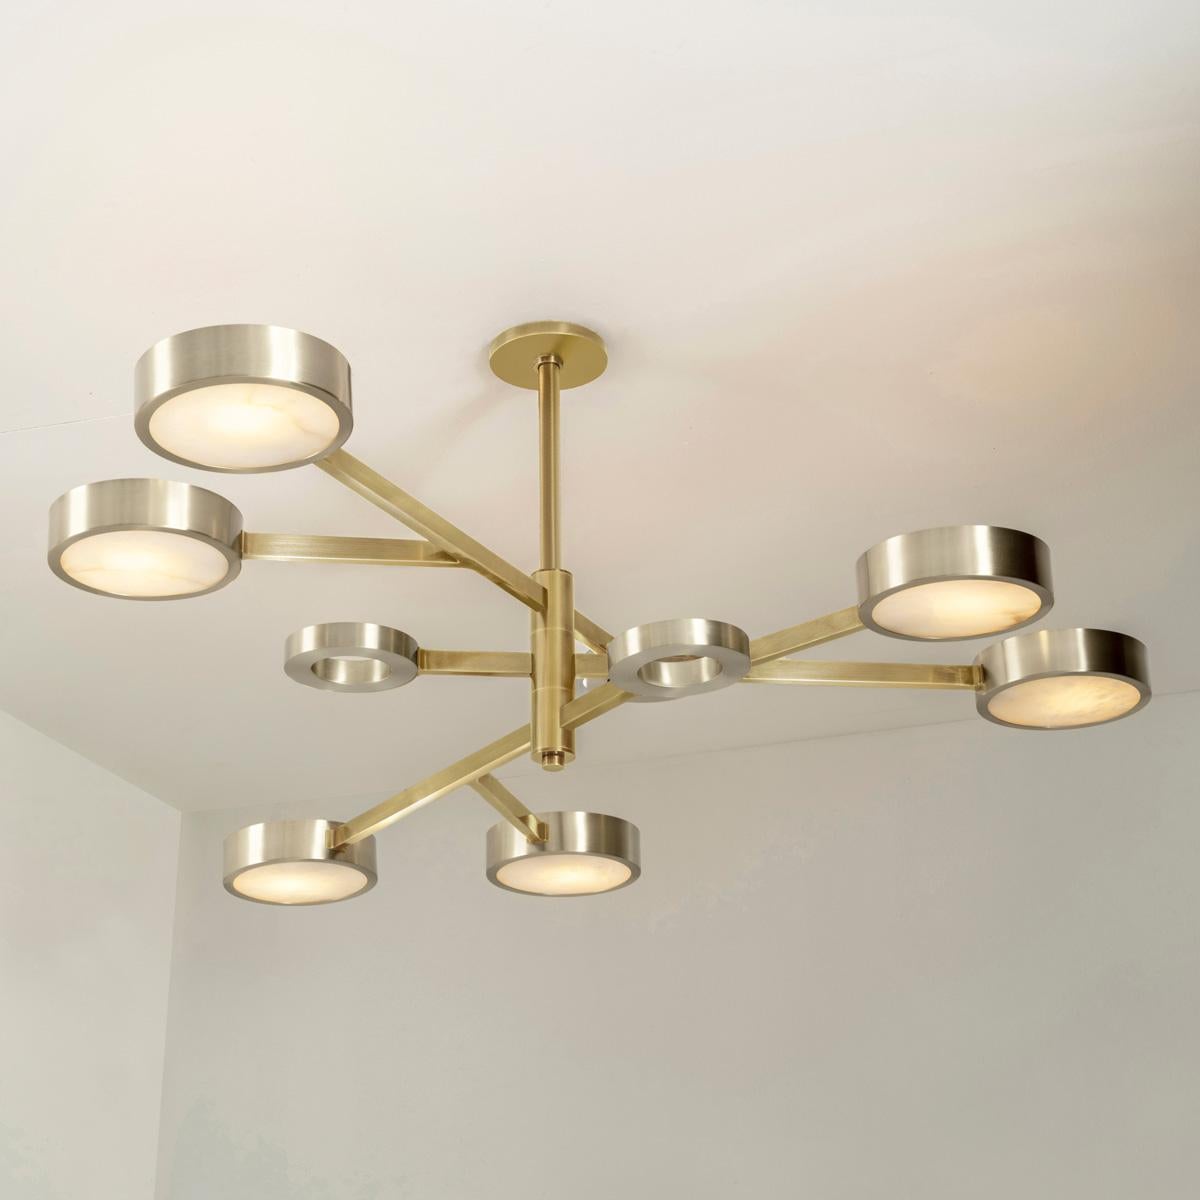 Modern Volterra Ceiling Light by Gaspare Asaro-Satin Nickel and Satin Brass Finish For Sale